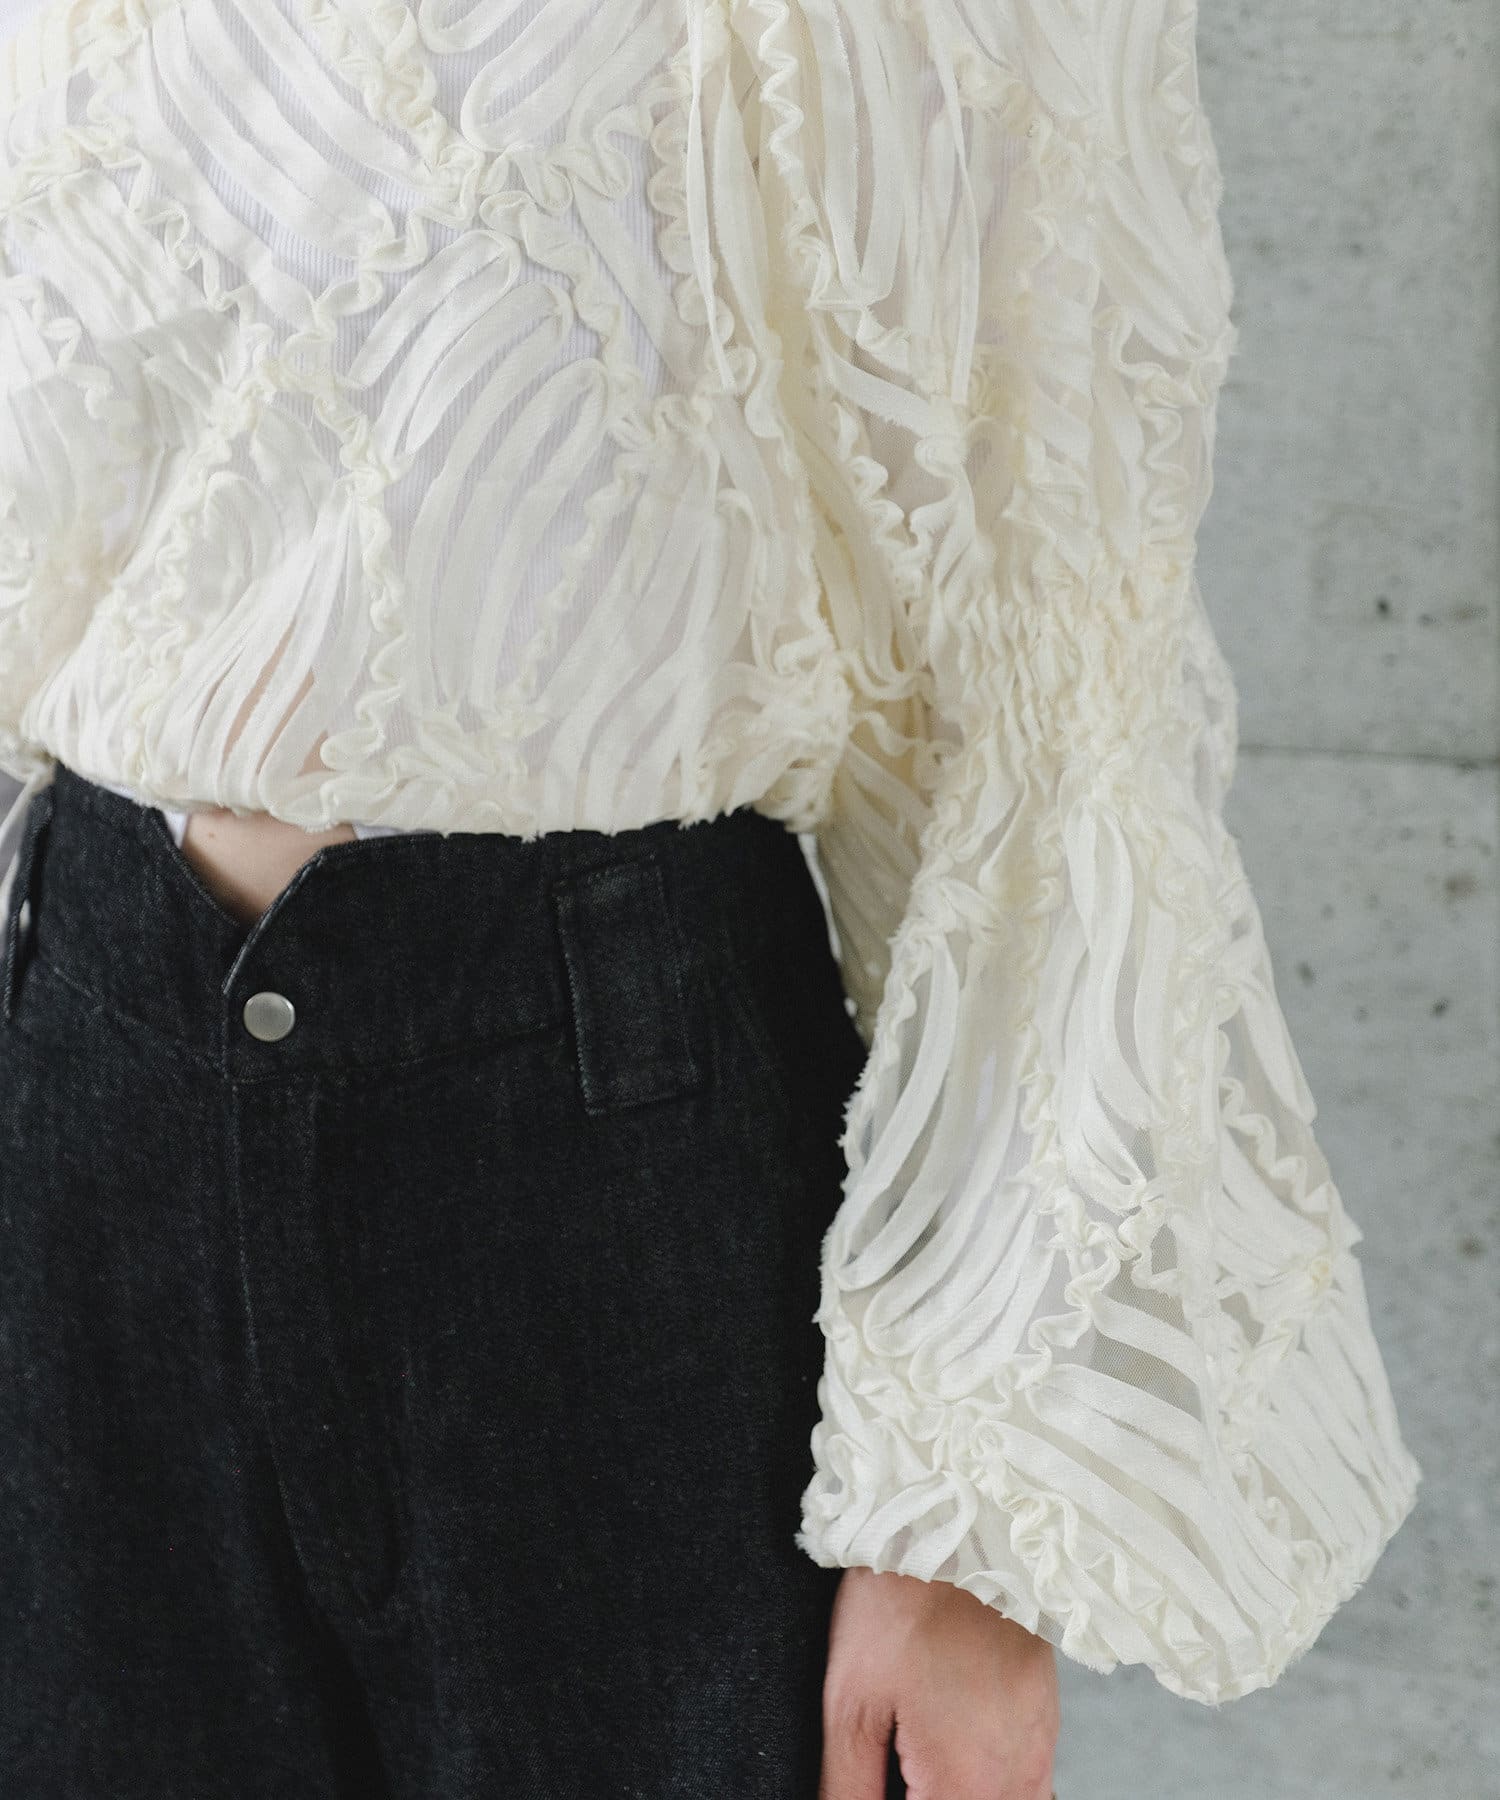 Pasterip(パセリ) One shoulder lace top